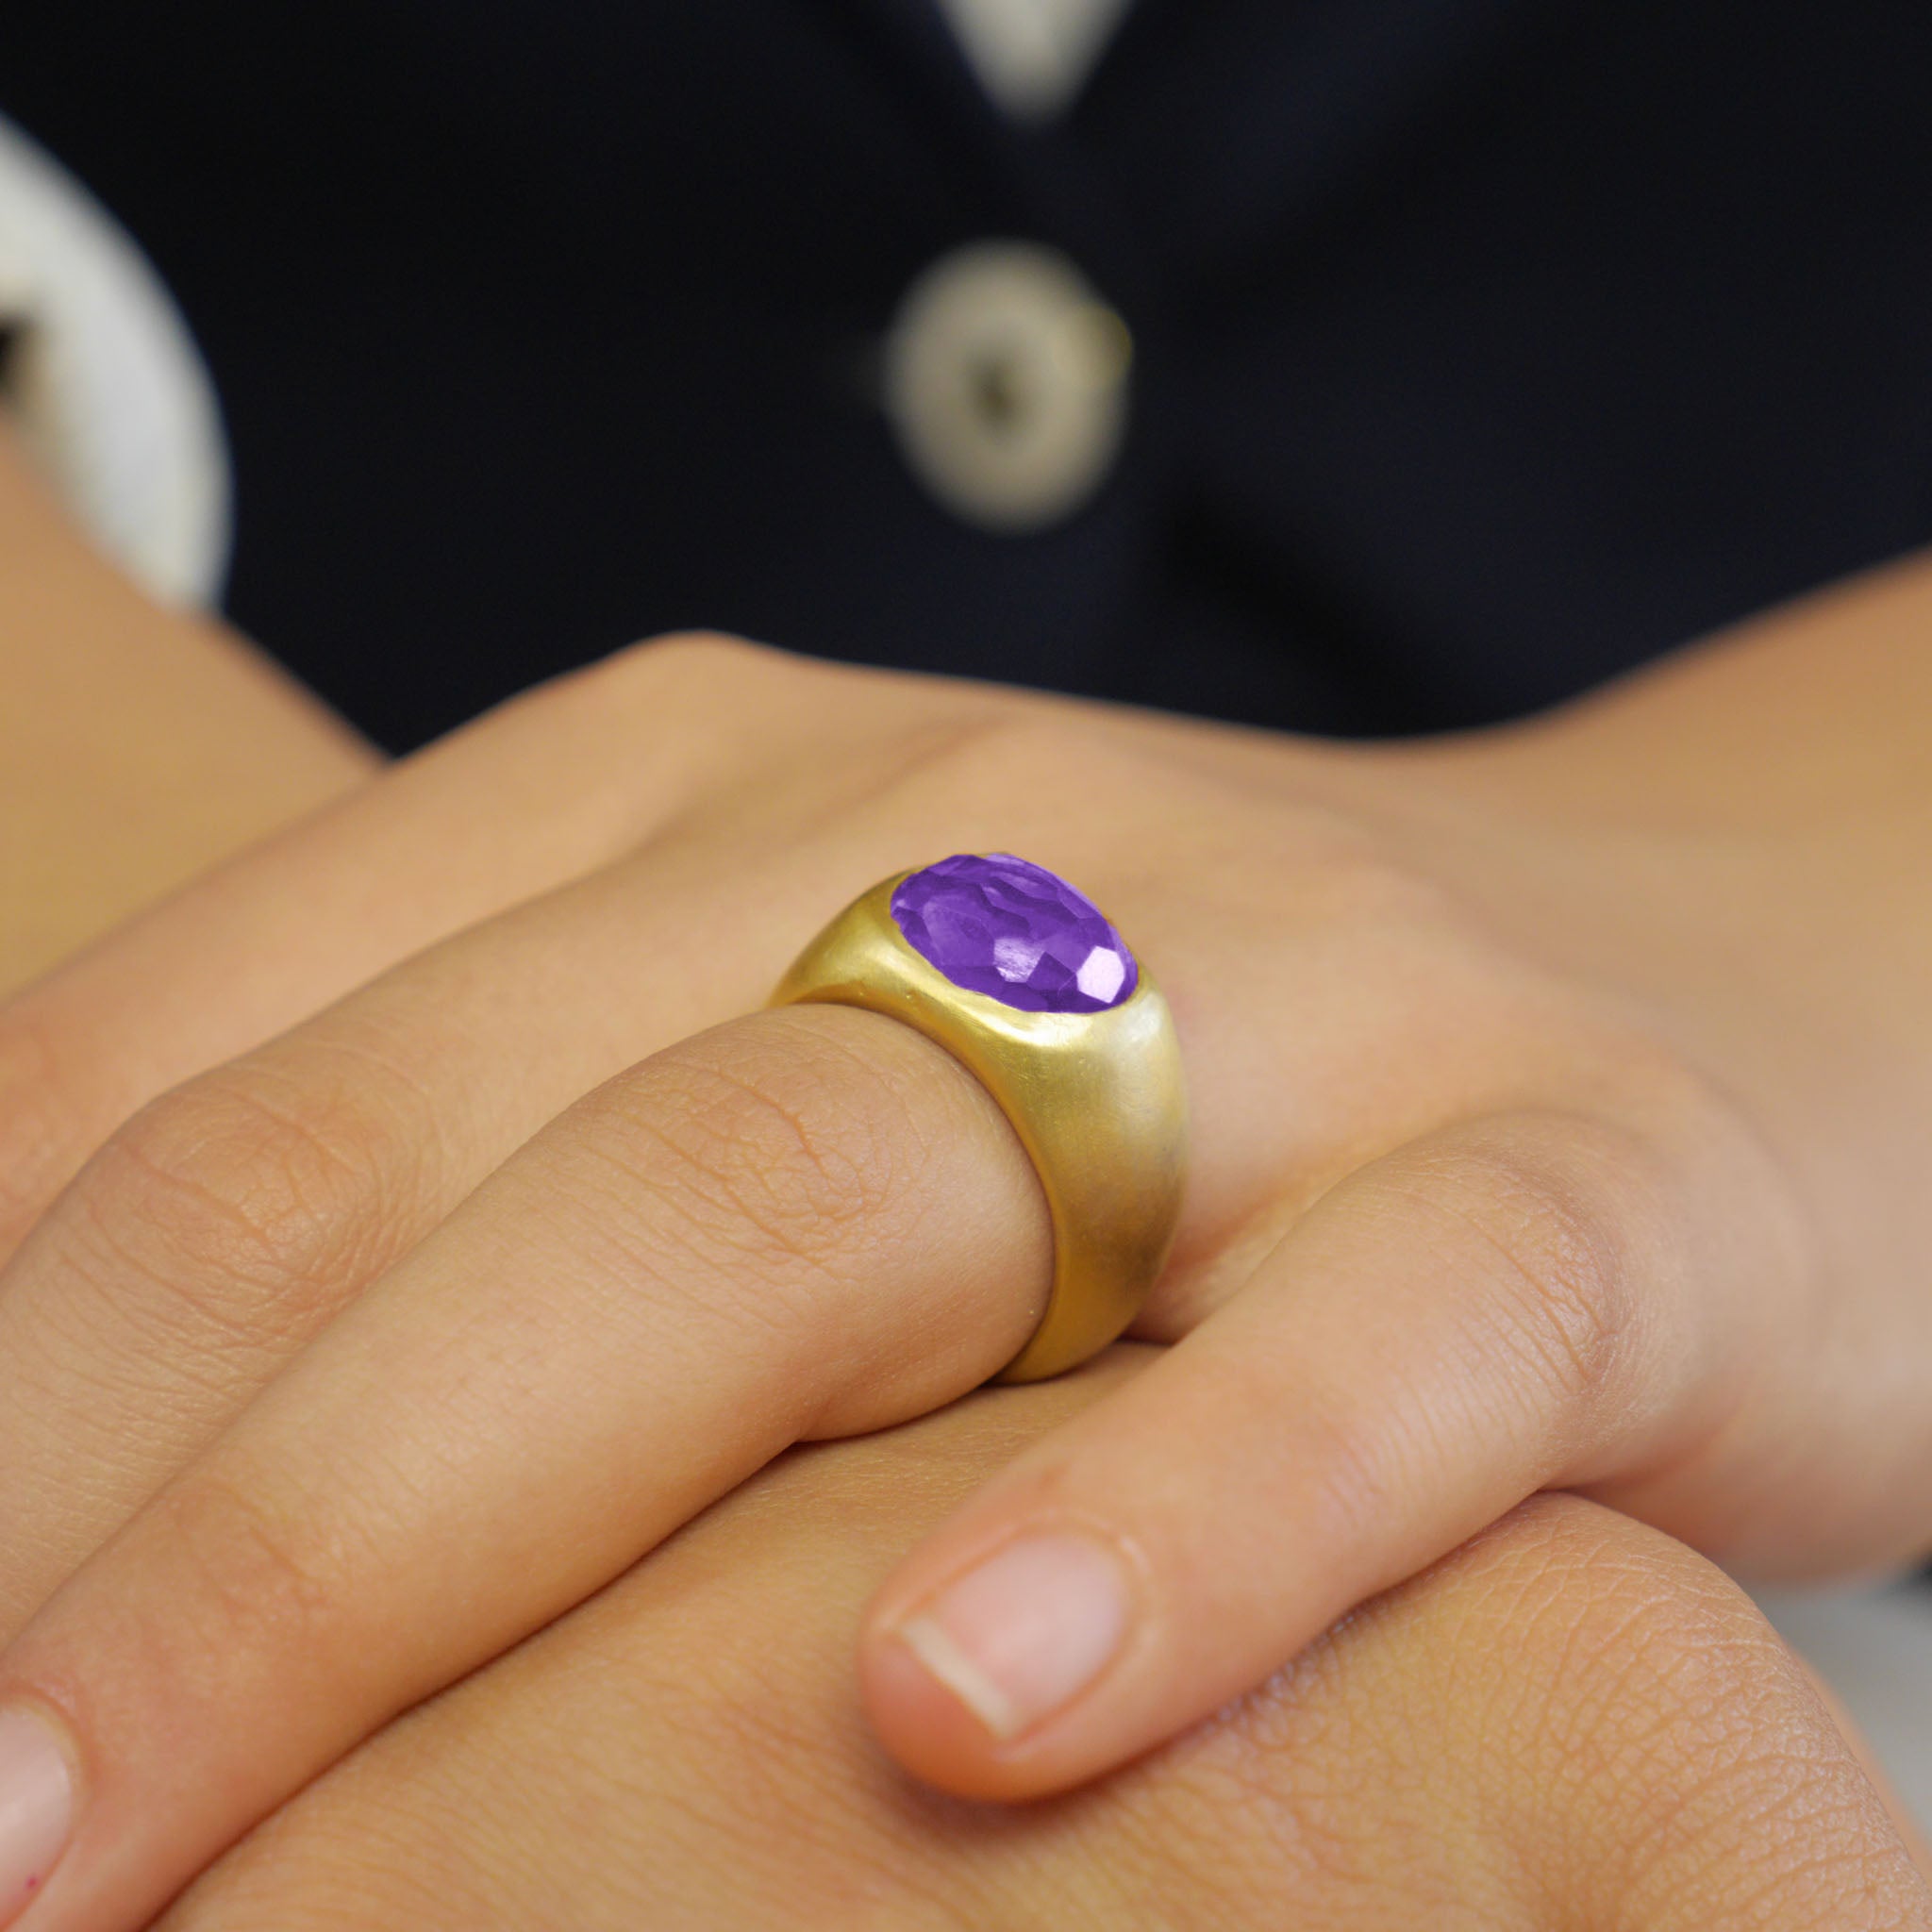 A timeless 18k Gold oval ring adorned with a captivating amethyst gemstone on a model. This classic piece exudes traditional elegance and is beloved for its enduring appeal.